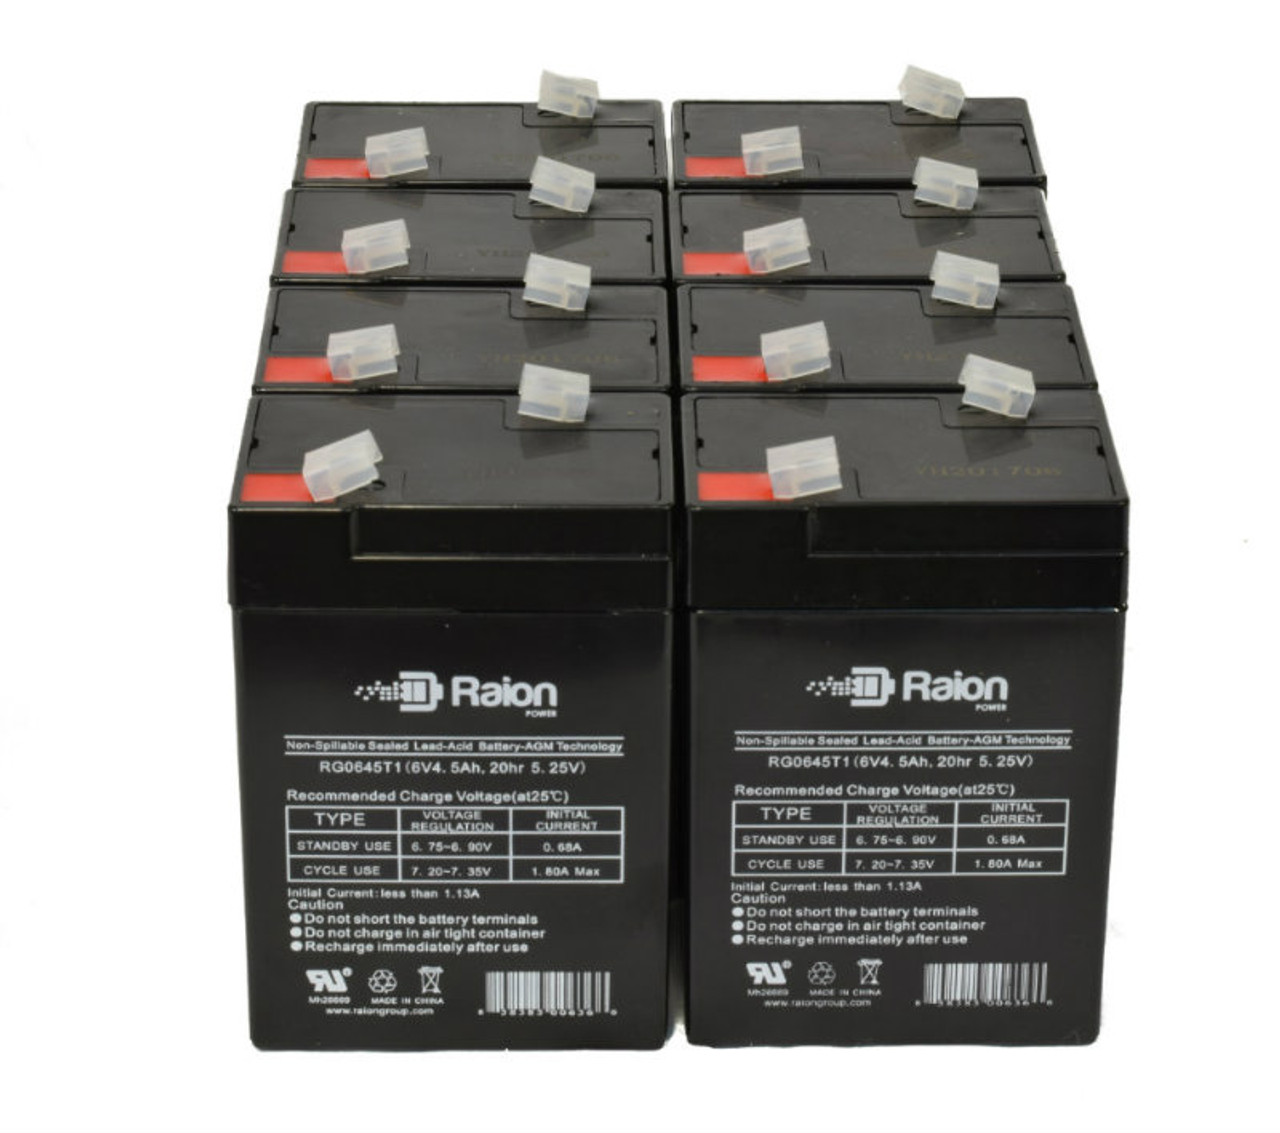 Raion Power RG0645T1 6V 4.5Ah Replacement Medical Equipment Battery for Criticare Systems TLCO2 - 8 Pack